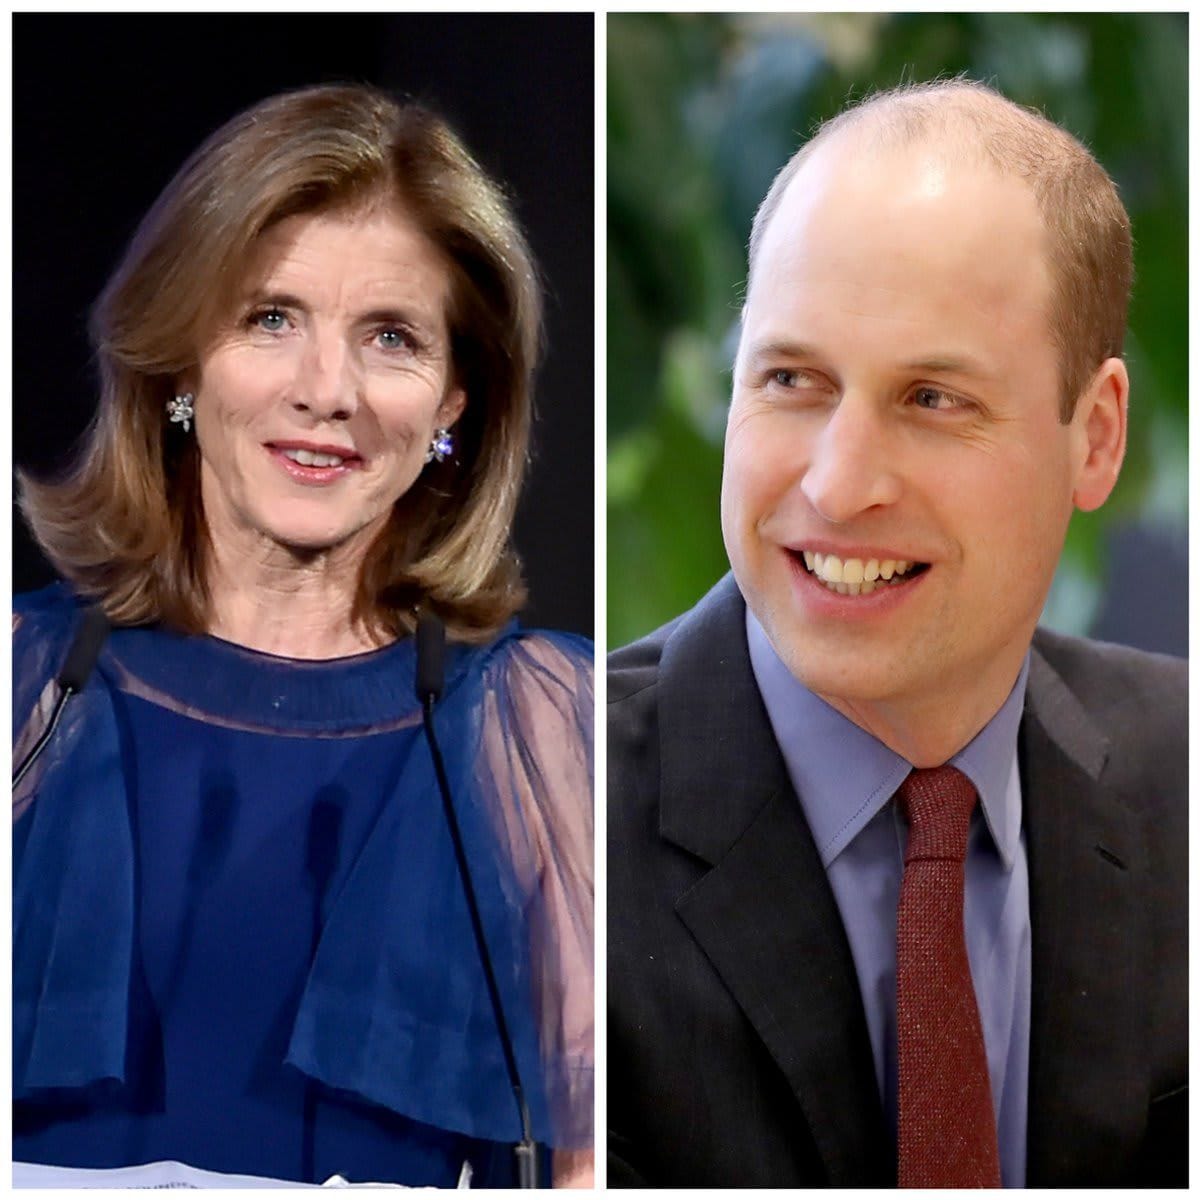 Prince William had a virtual meeting with Caroline Kennedy on April 29